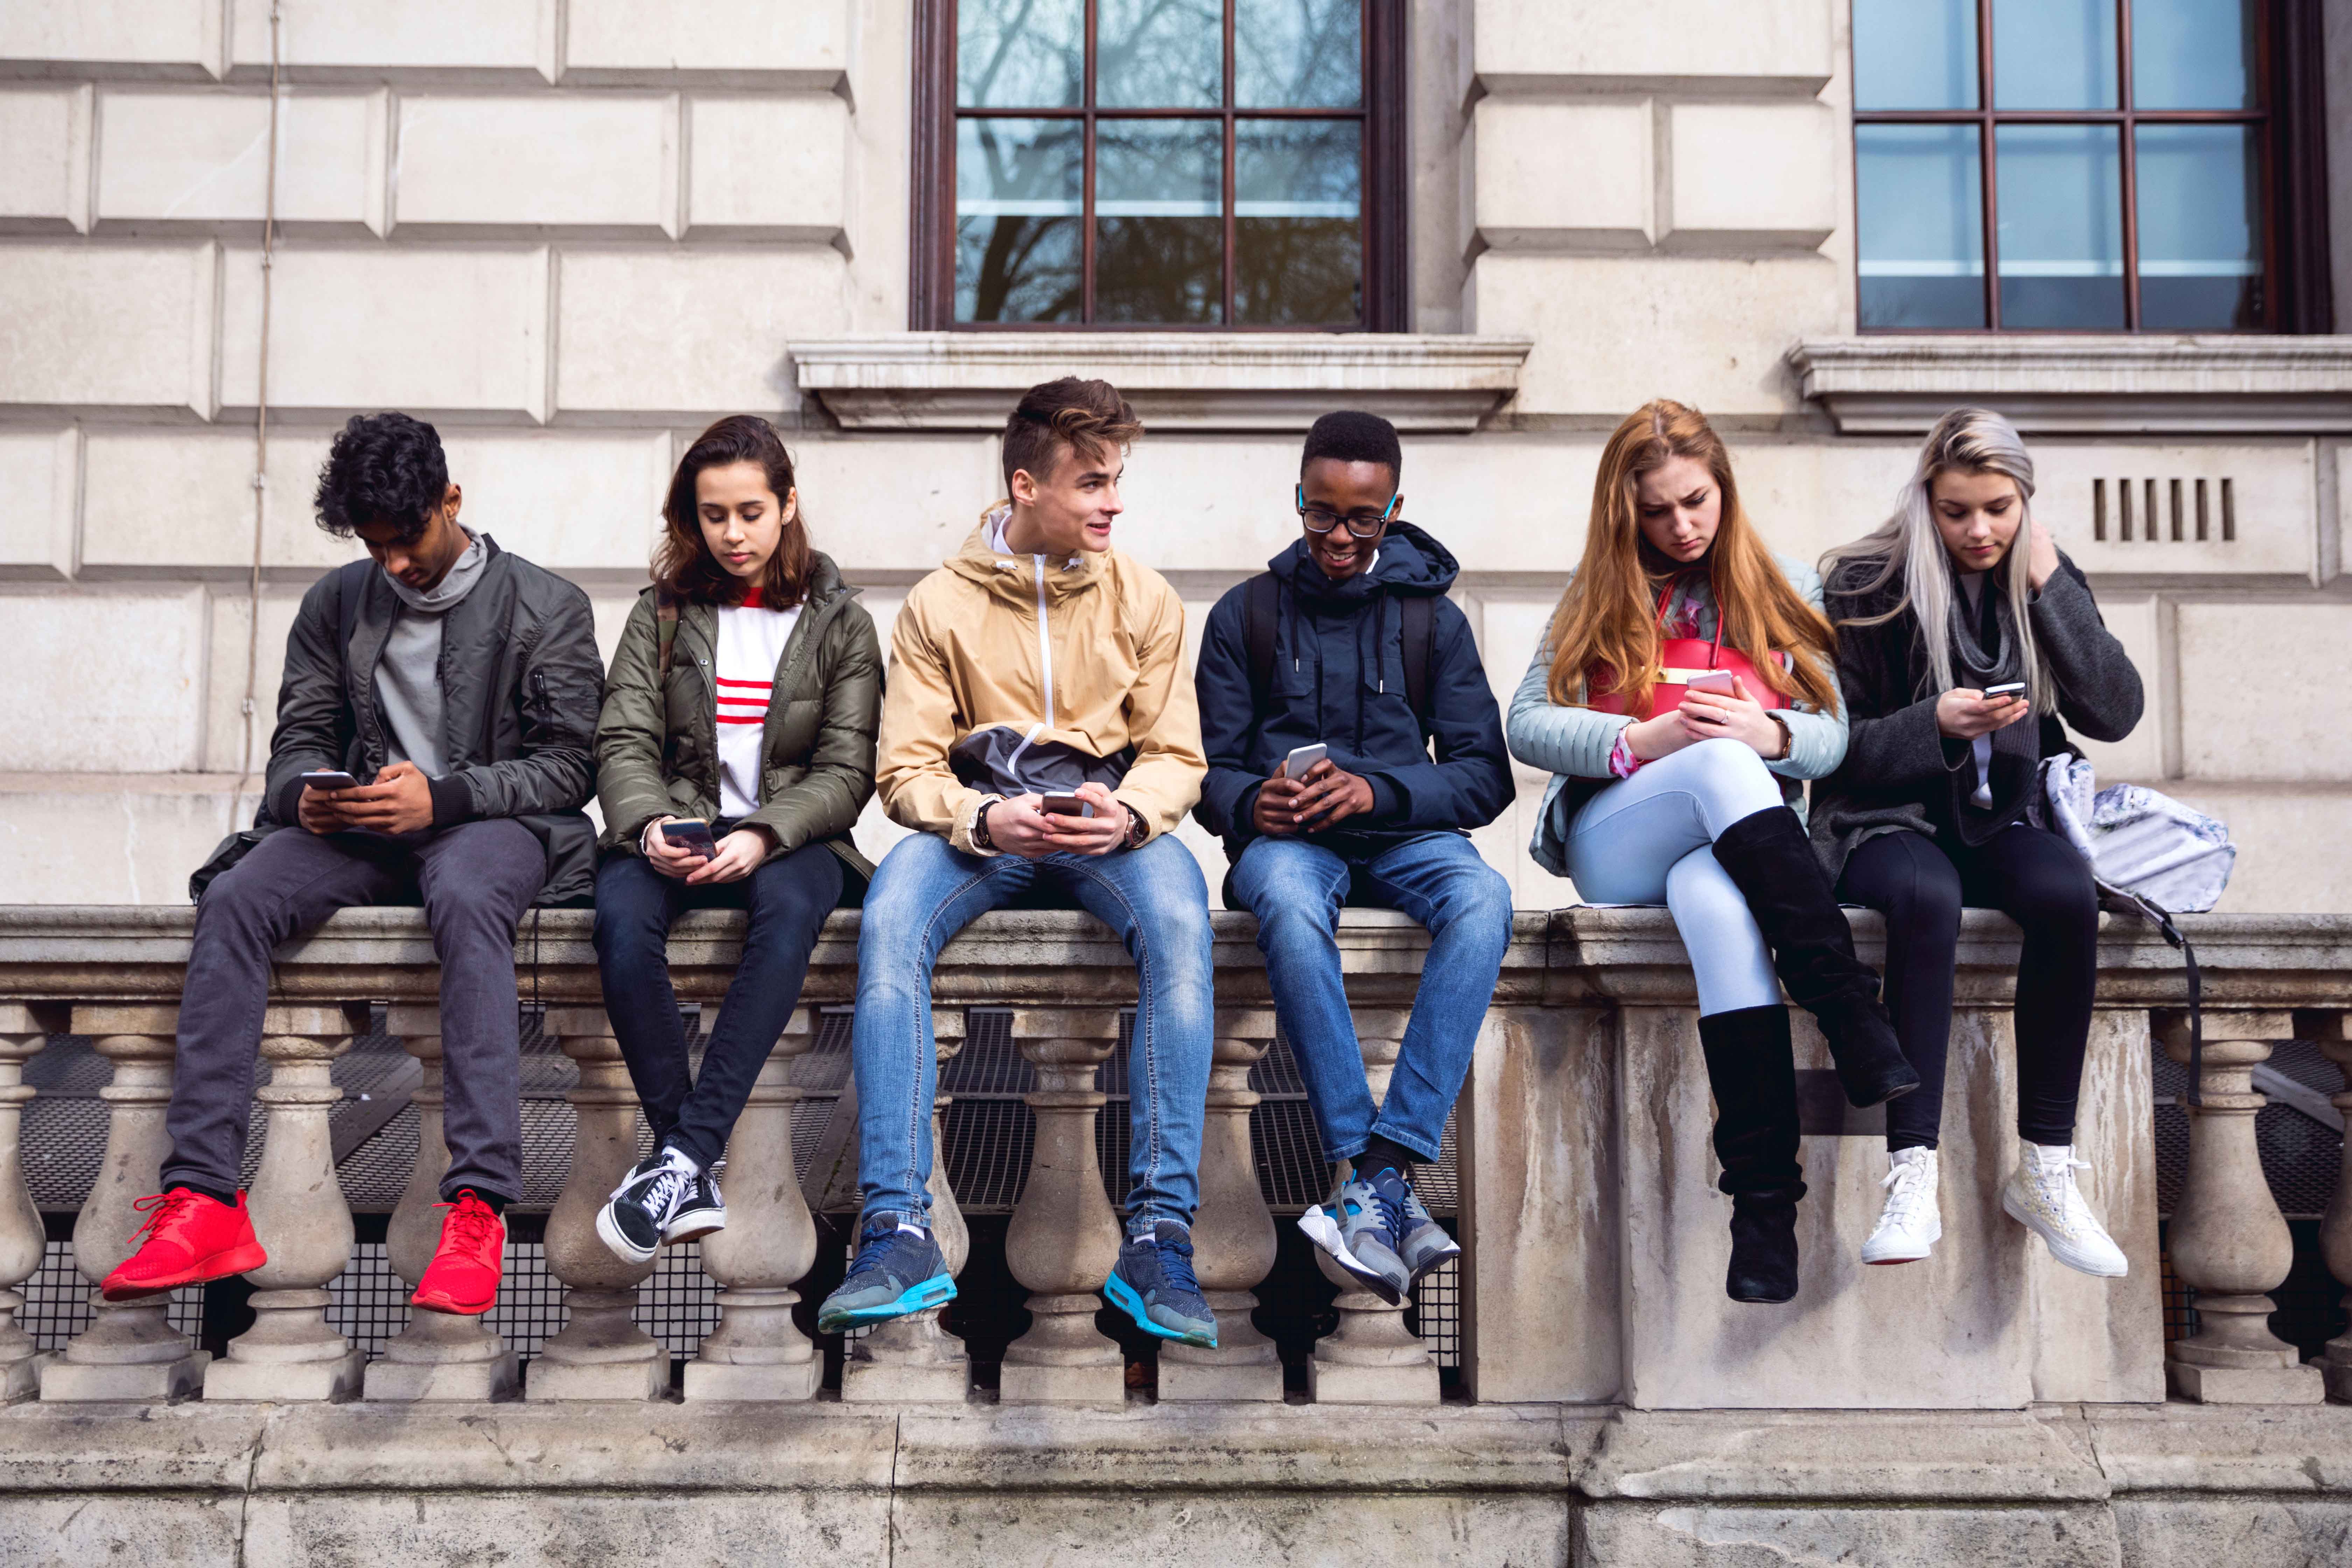 high-school-aged kids sitting along a building's stone rail, looking at mobile devices